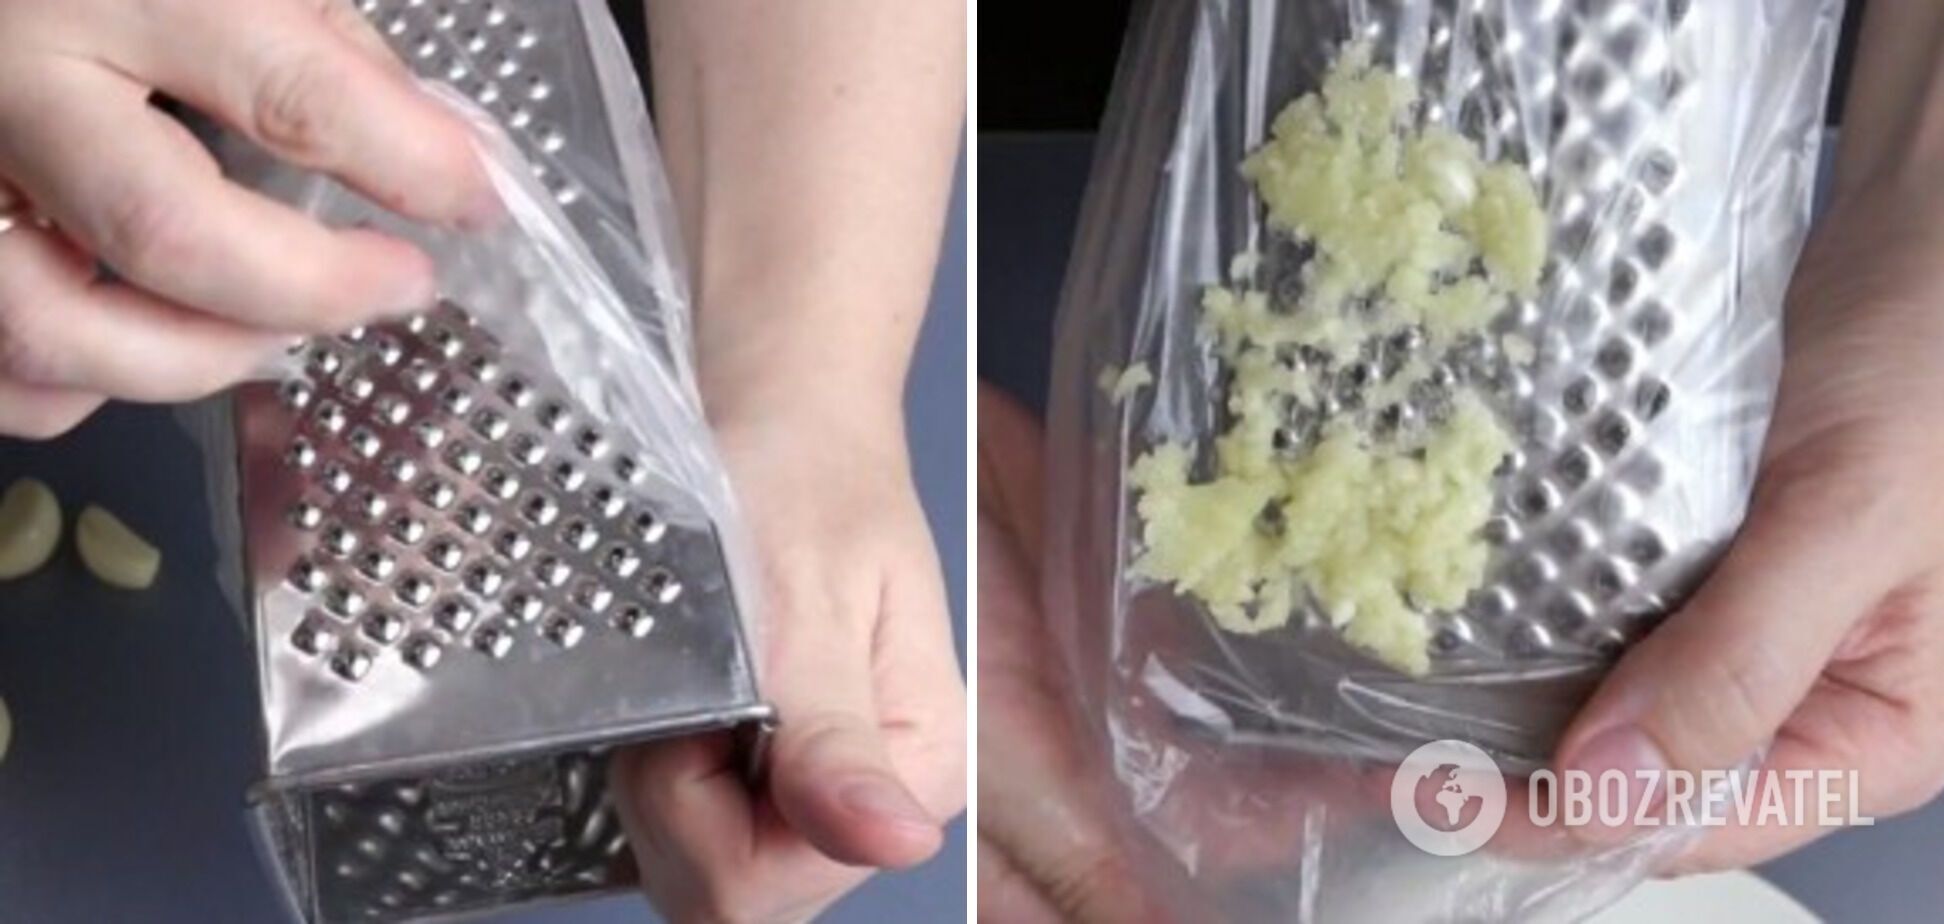 How to grate garlic with cling film